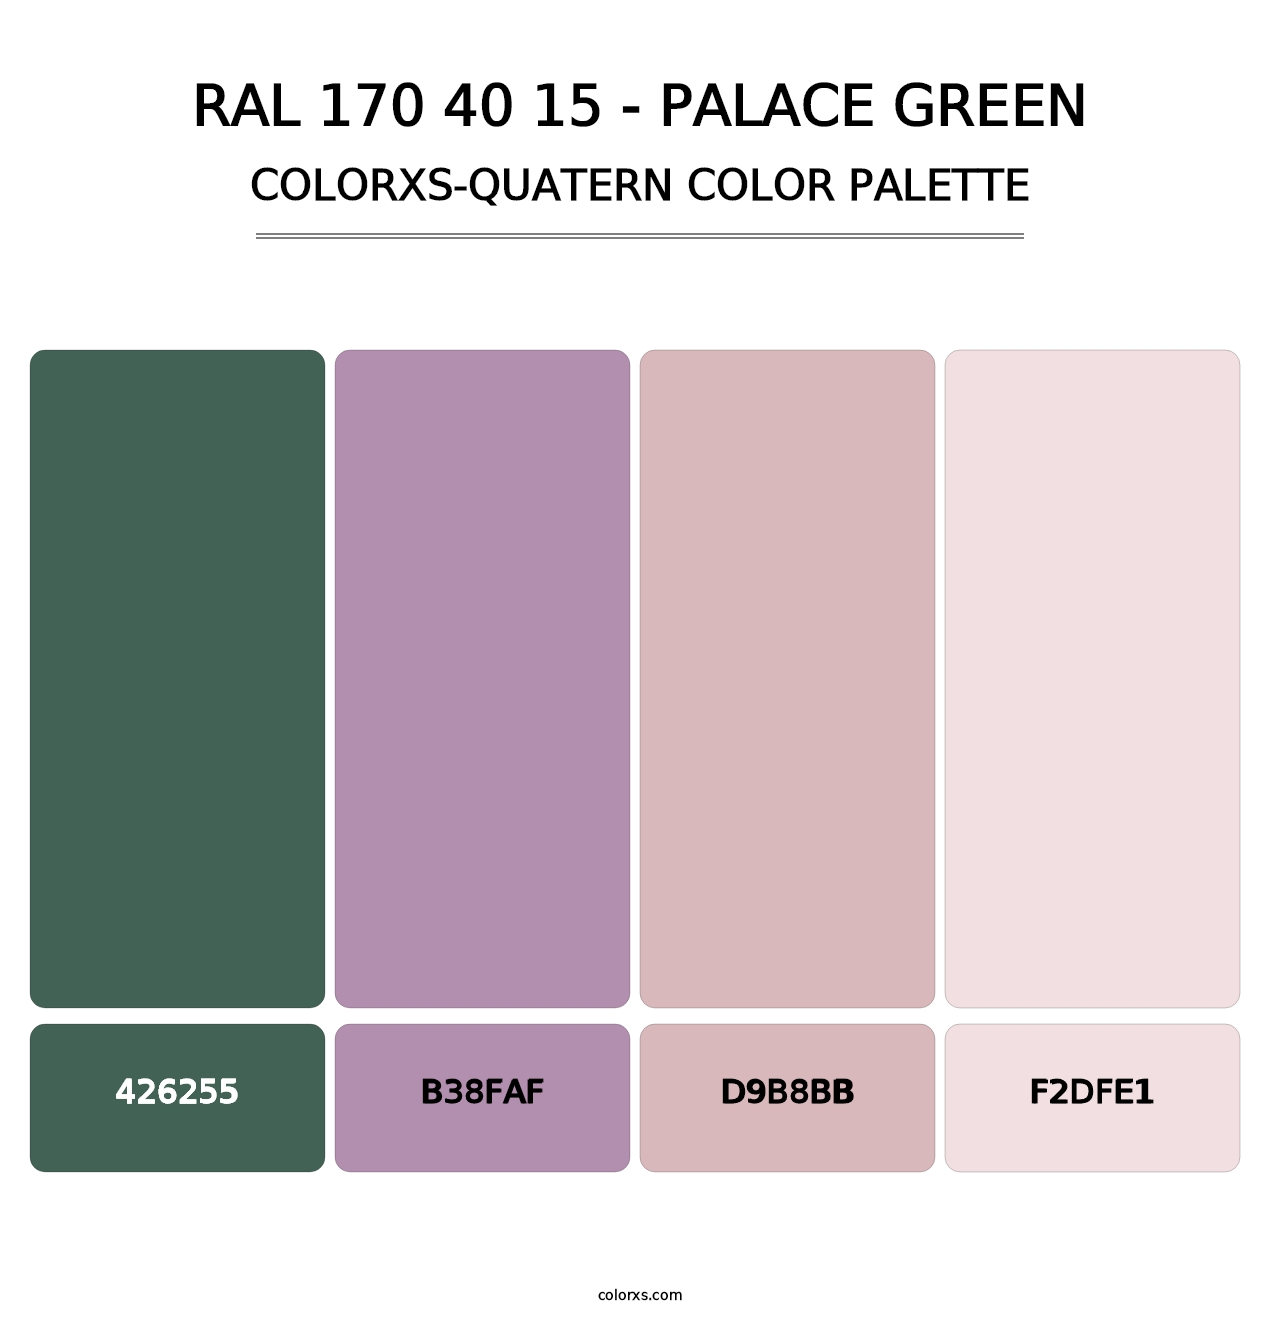 RAL 170 40 15 - Palace Green - Colorxs Quatern Palette